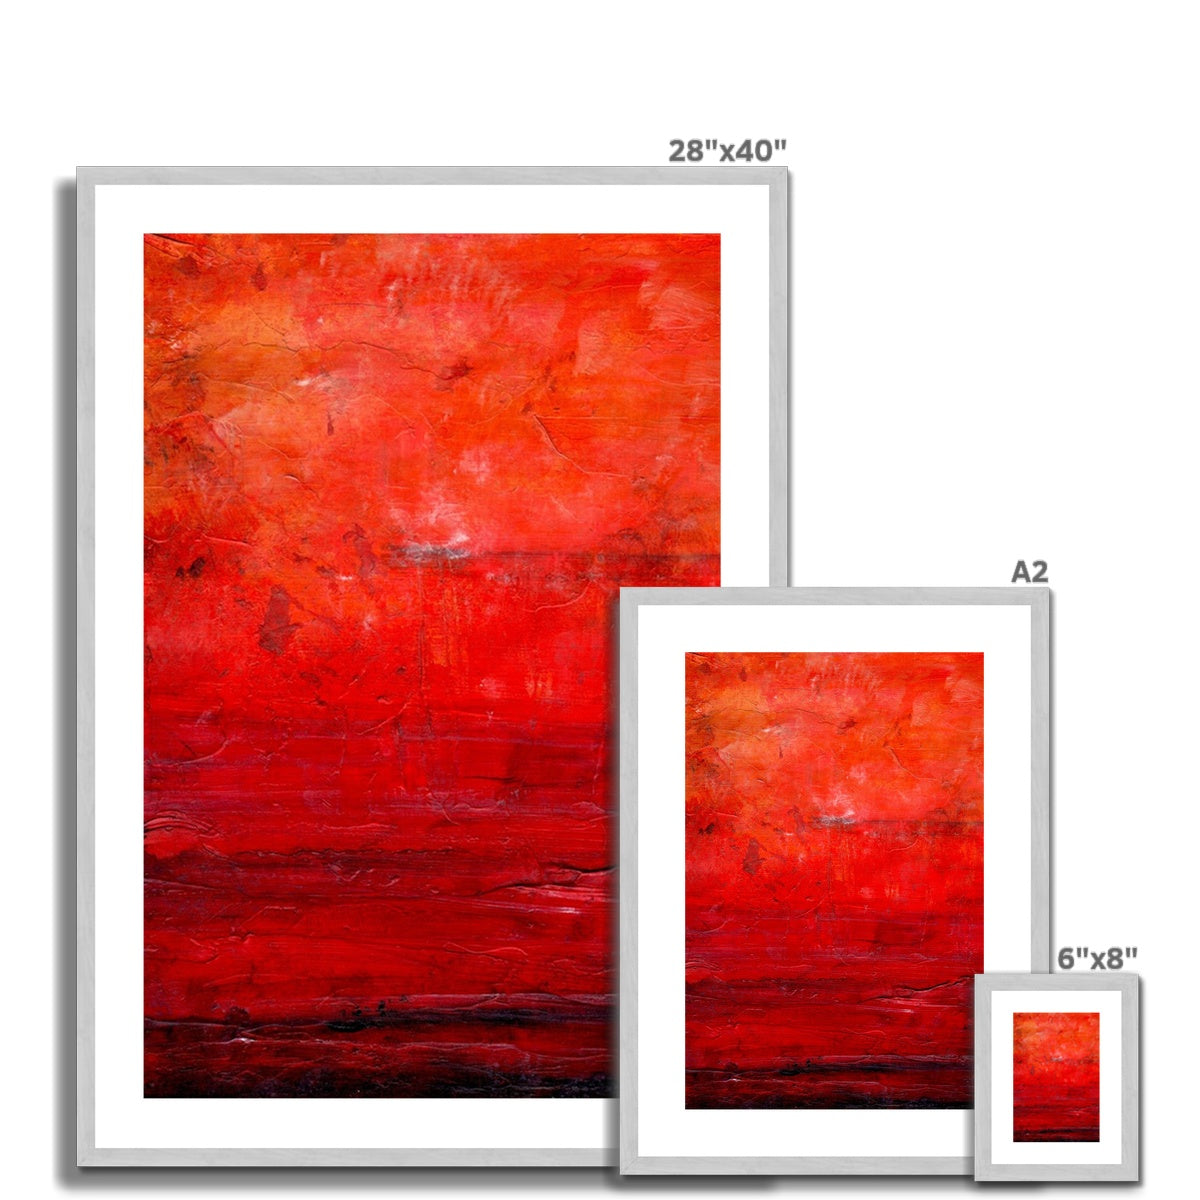 Abstract Summer Painting | Antique Framed & Mounted Prints From Scotland-Antique Framed & Mounted Prints-Abstract & Impressionistic Art Gallery-Paintings, Prints, Homeware, Art Gifts From Scotland By Scottish Artist Kevin Hunter